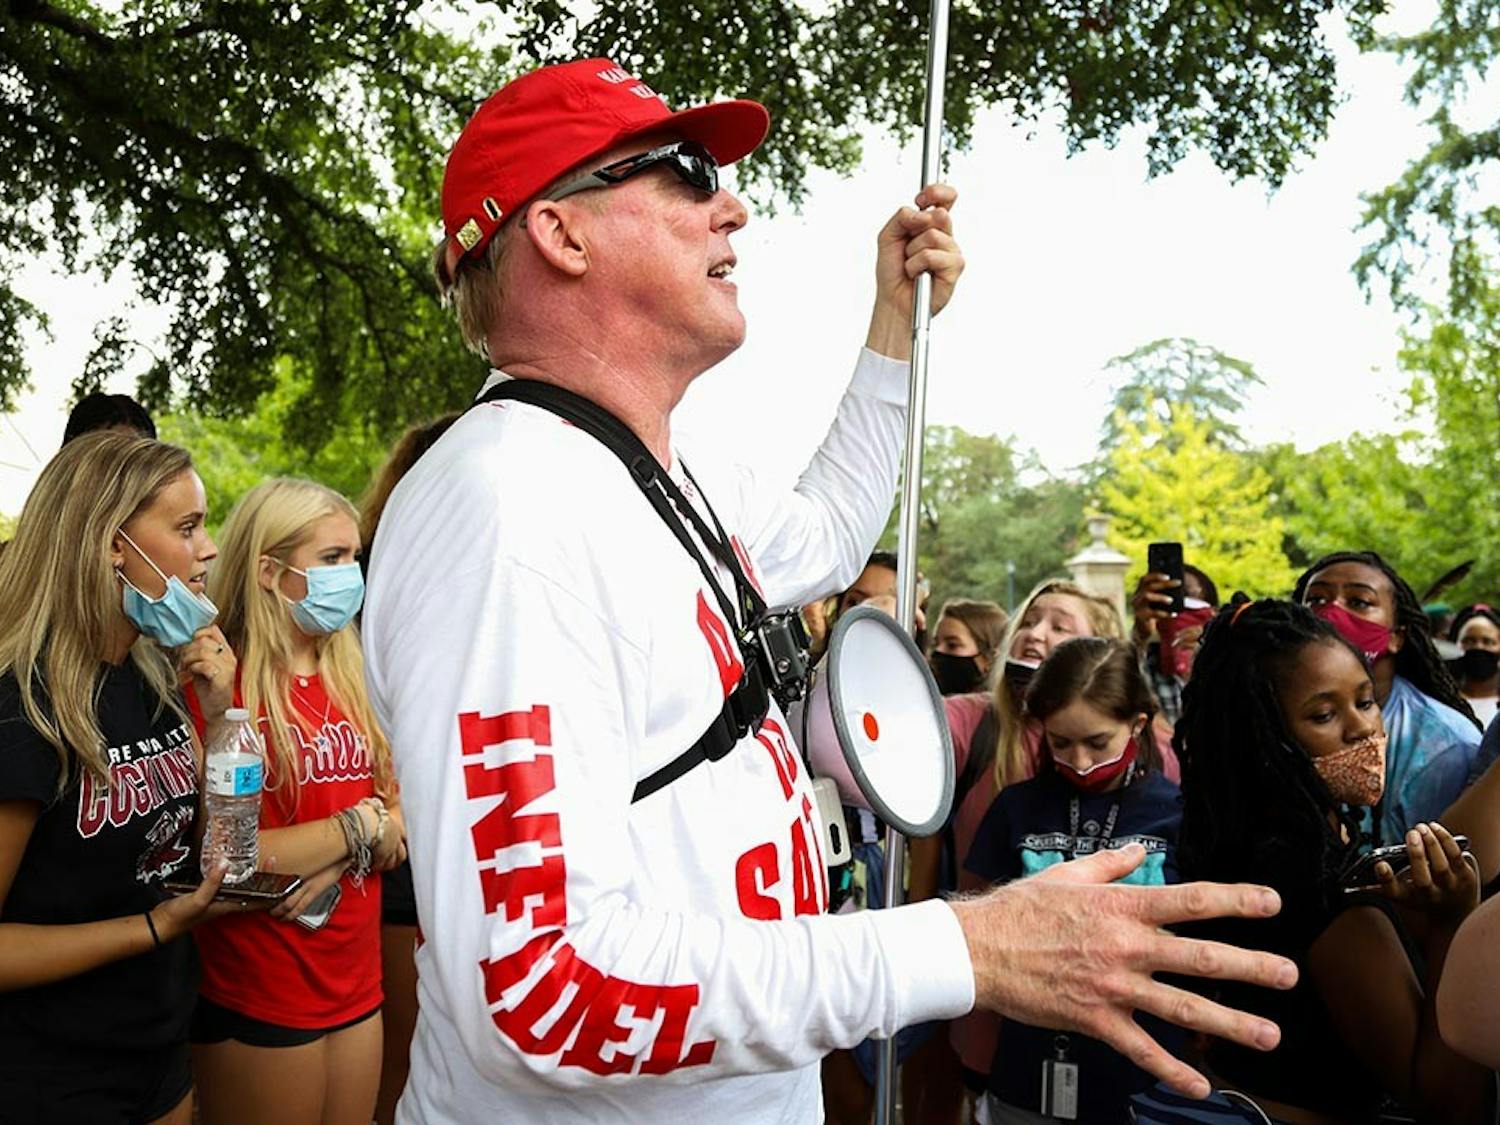 Jim Gilles preaches to the crowd surrounding him on Greene Street Friday afternoon while he holds up his “BLM are Racist Thugs” sign and is decked out in MAGA gear.